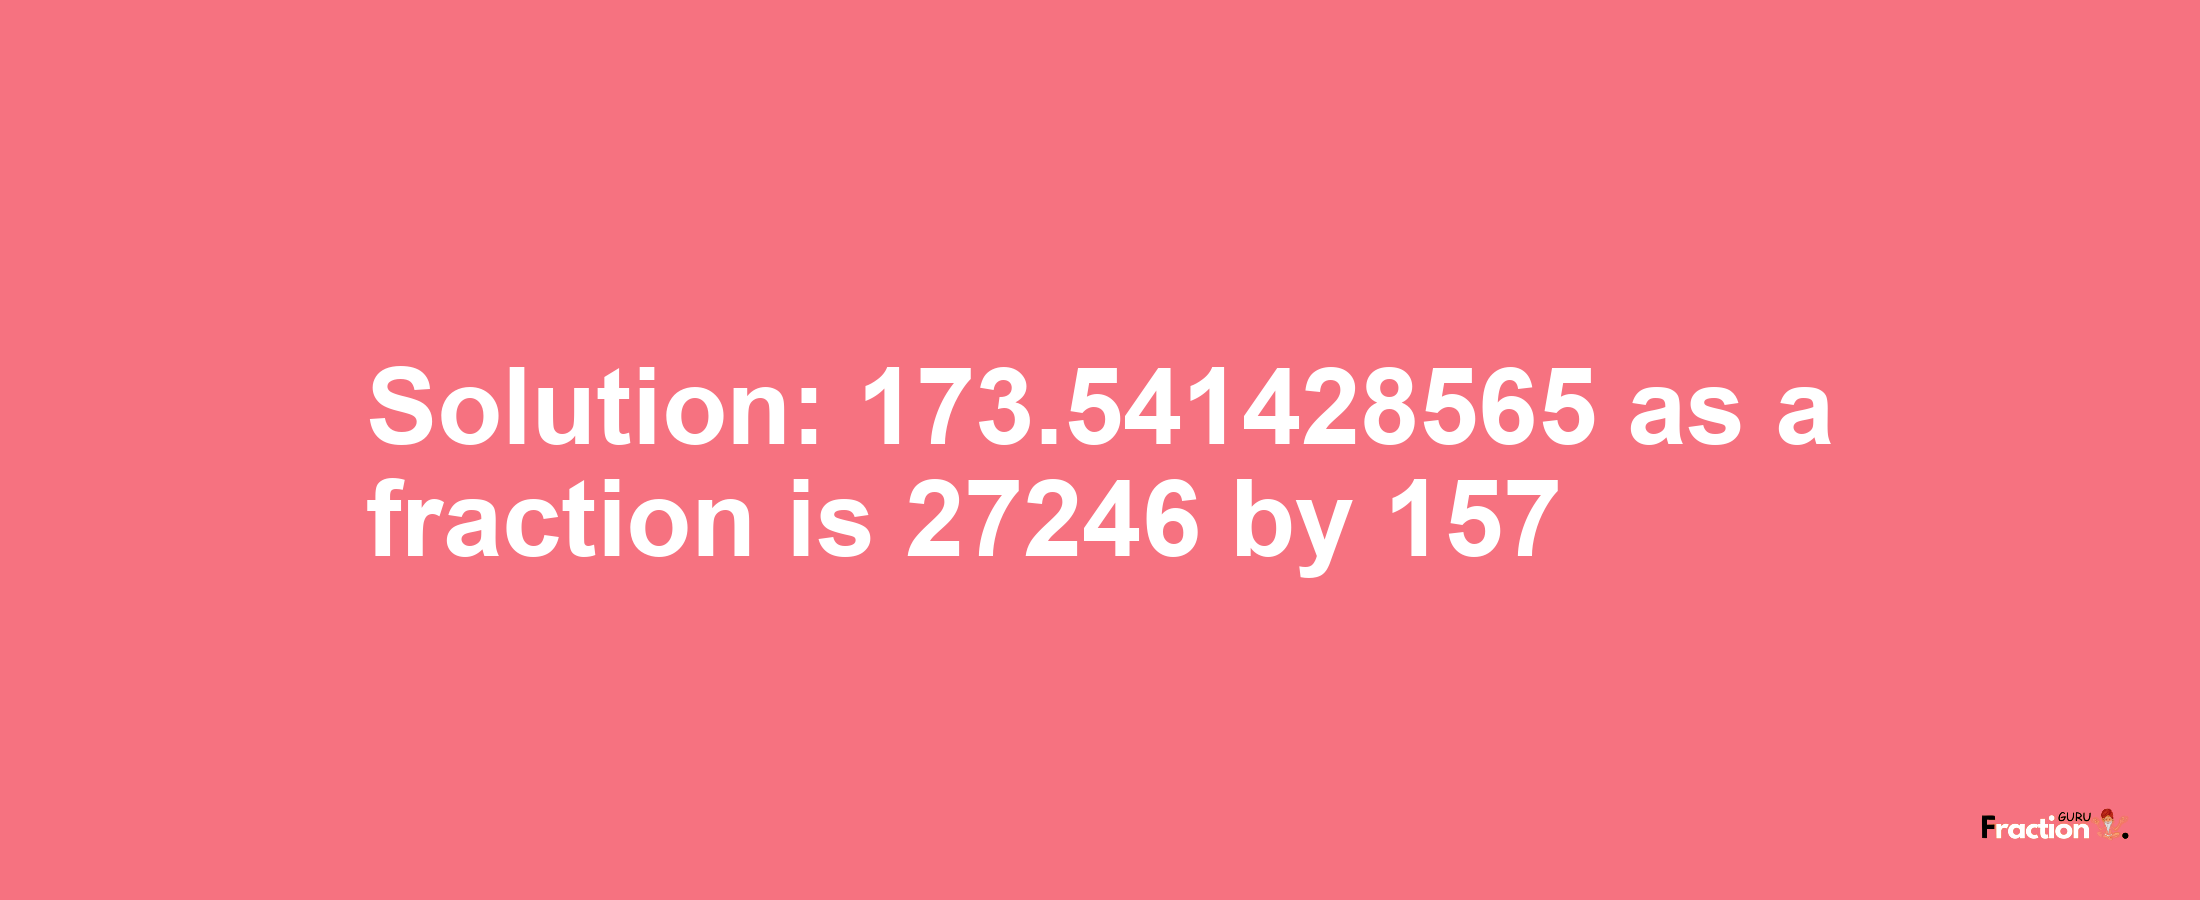 Solution:173.541428565 as a fraction is 27246/157